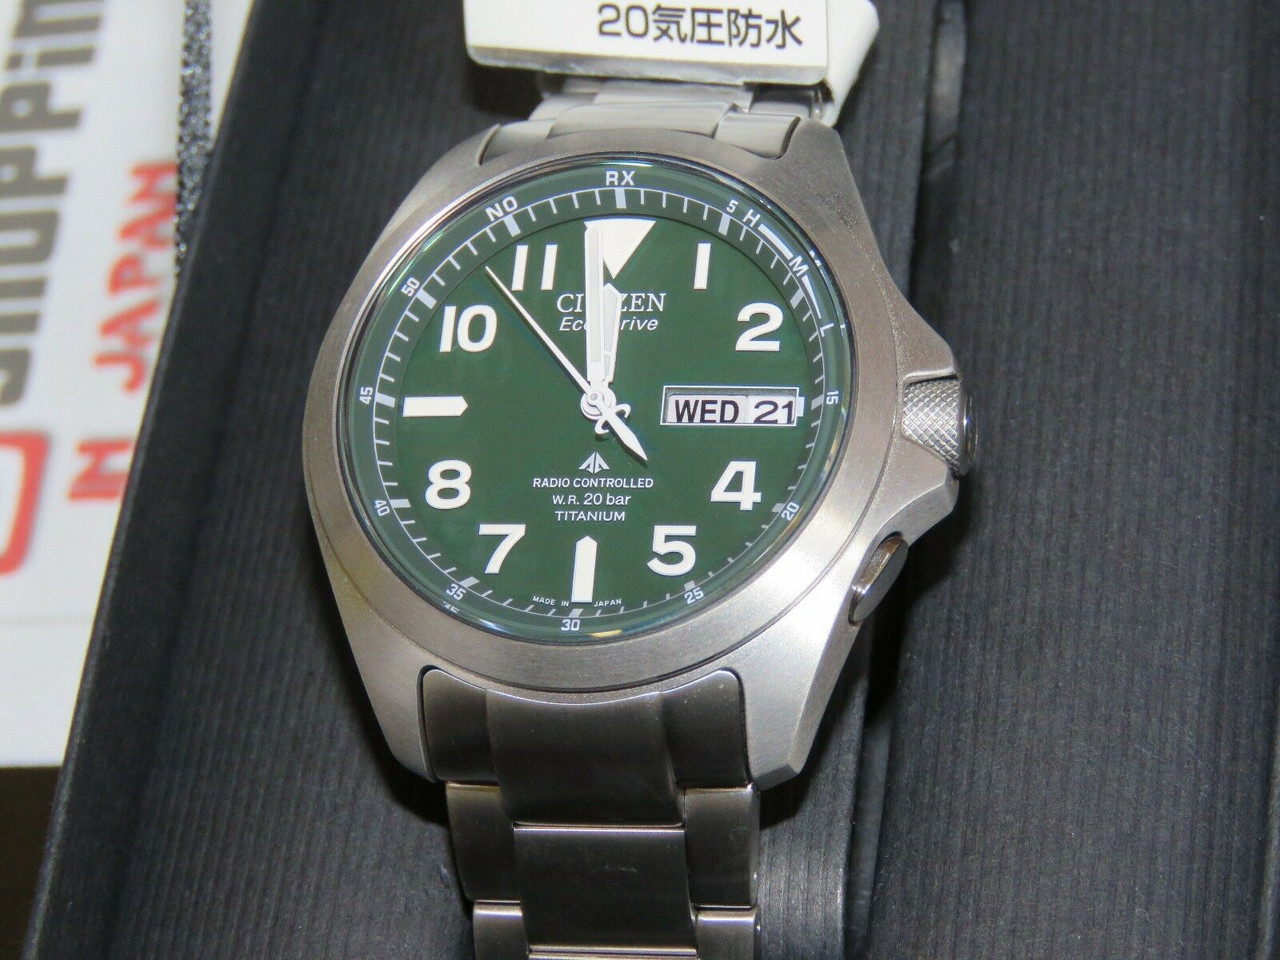 Citizen Promaster PMD56-2951 LAND Green Eco-Drive